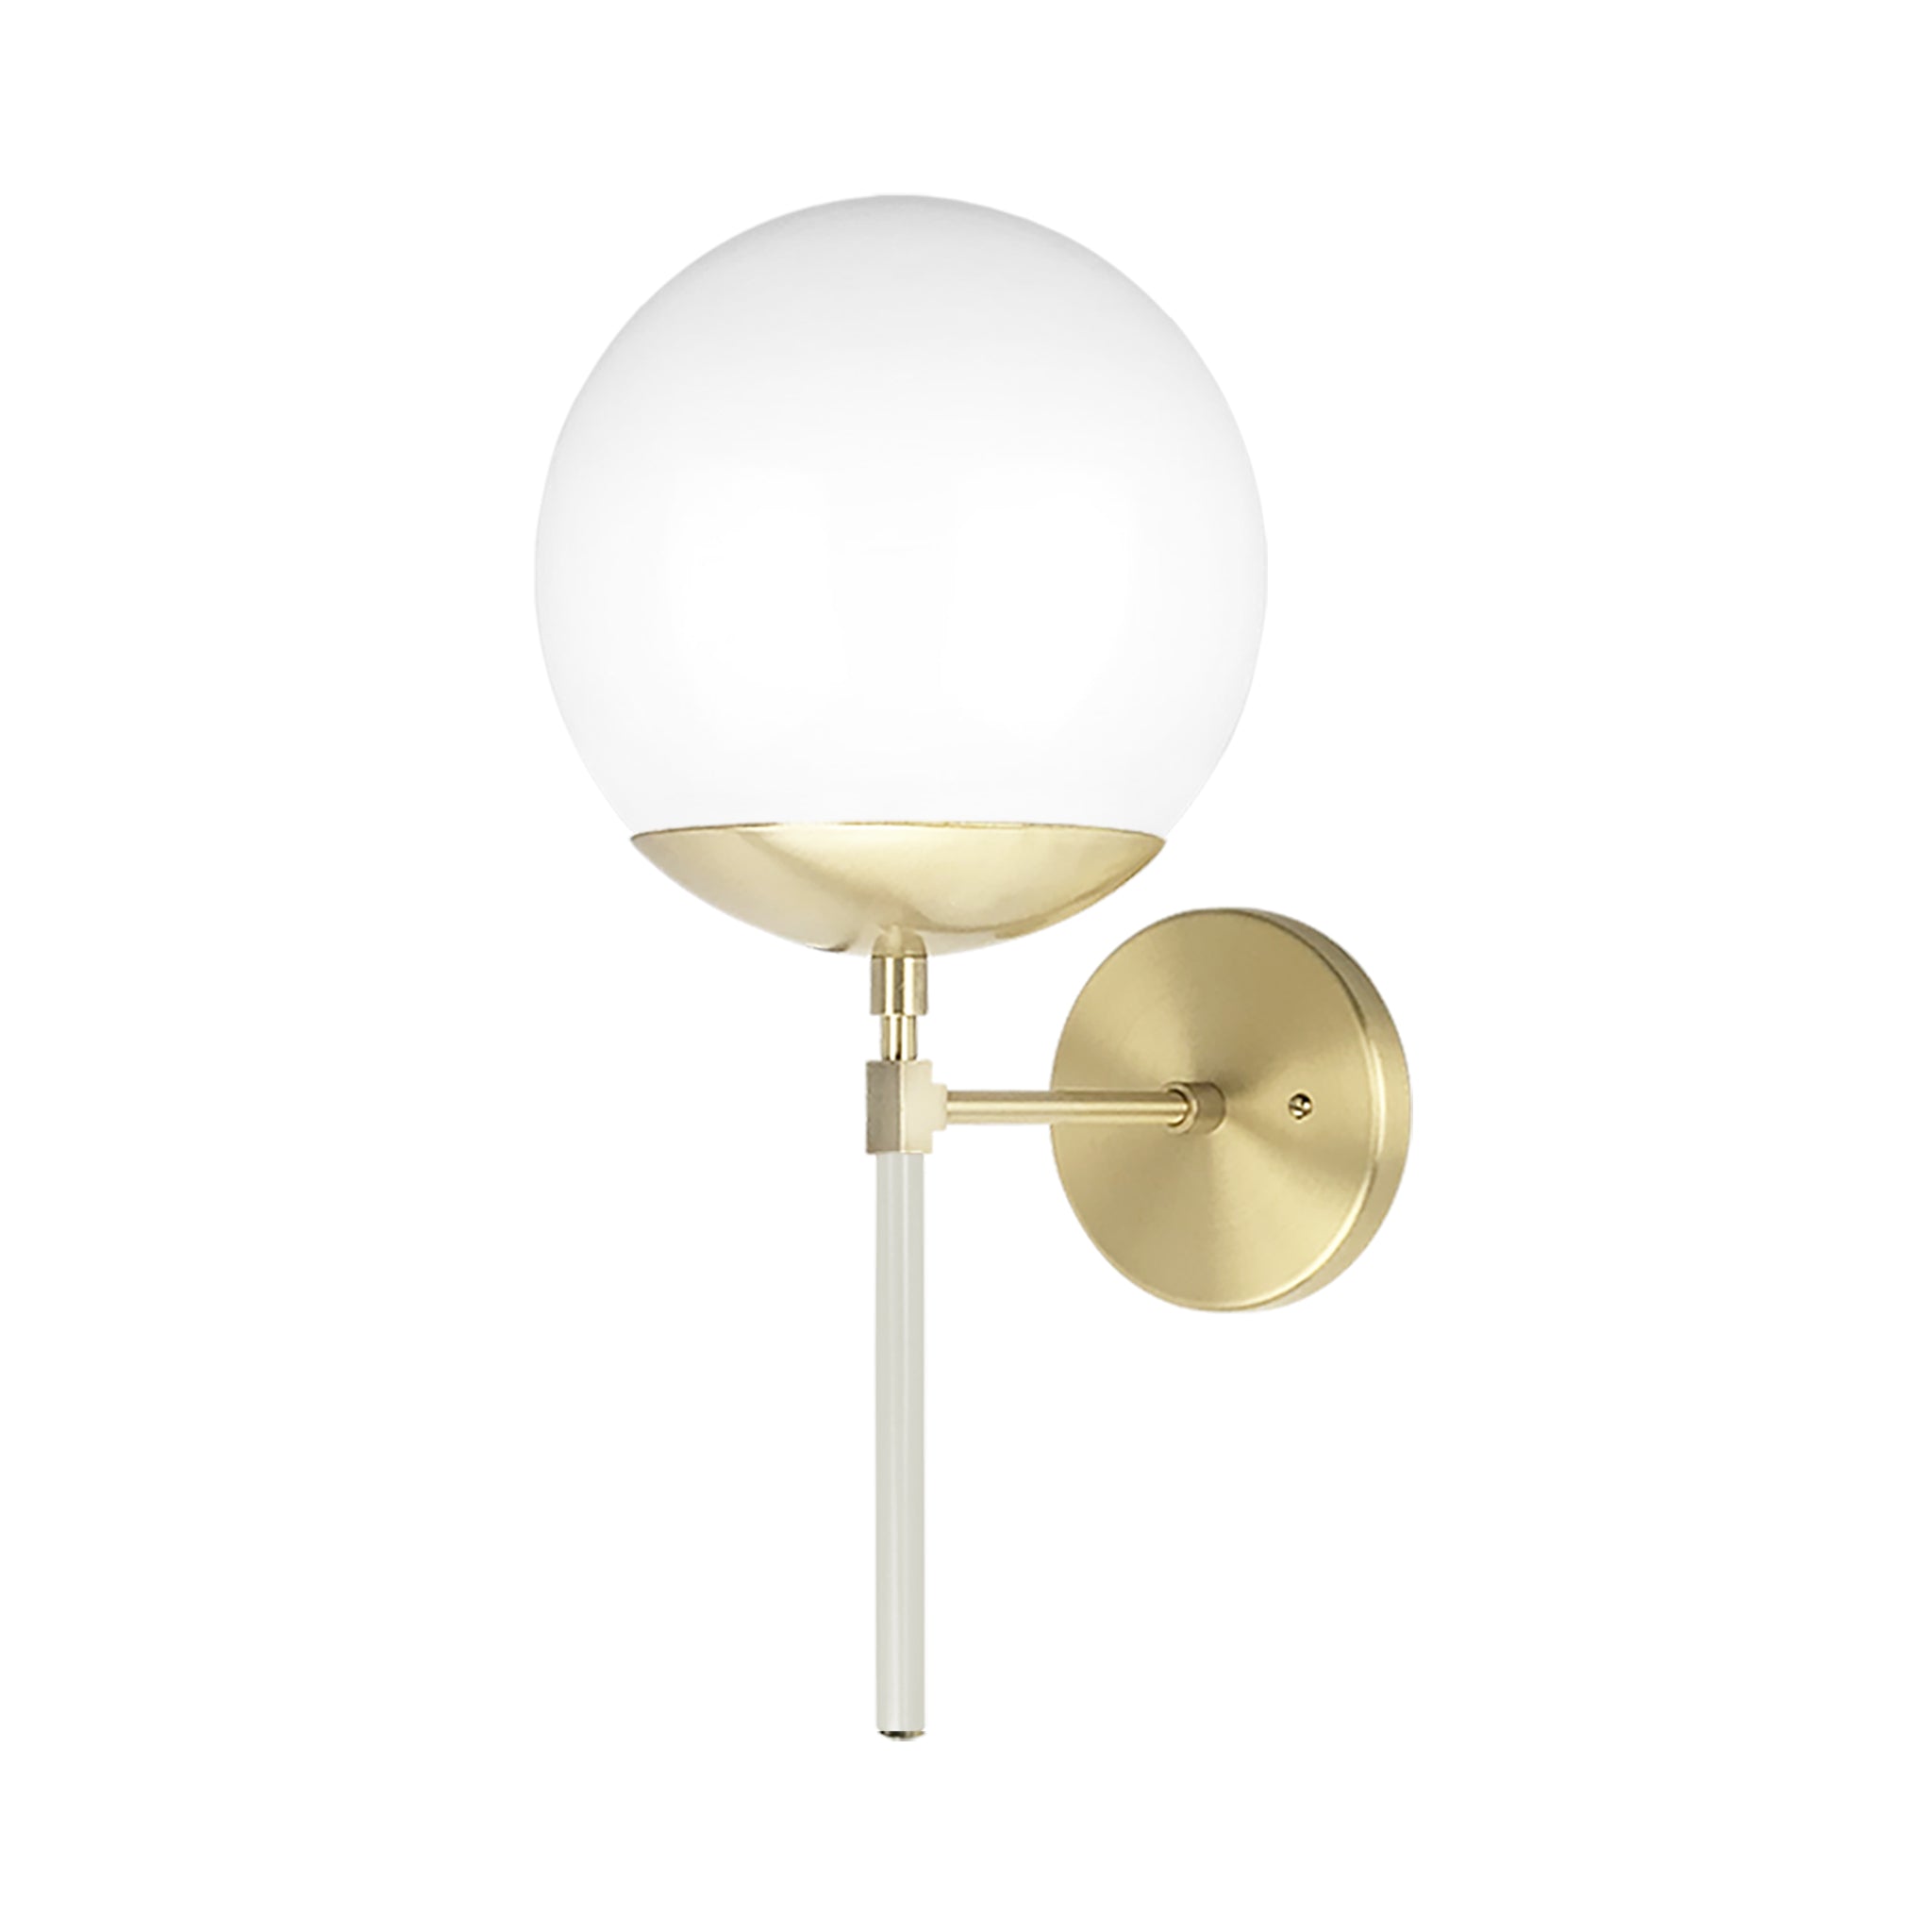 Brass and bone color Lolli sconce 8" Dutton Brown lighting